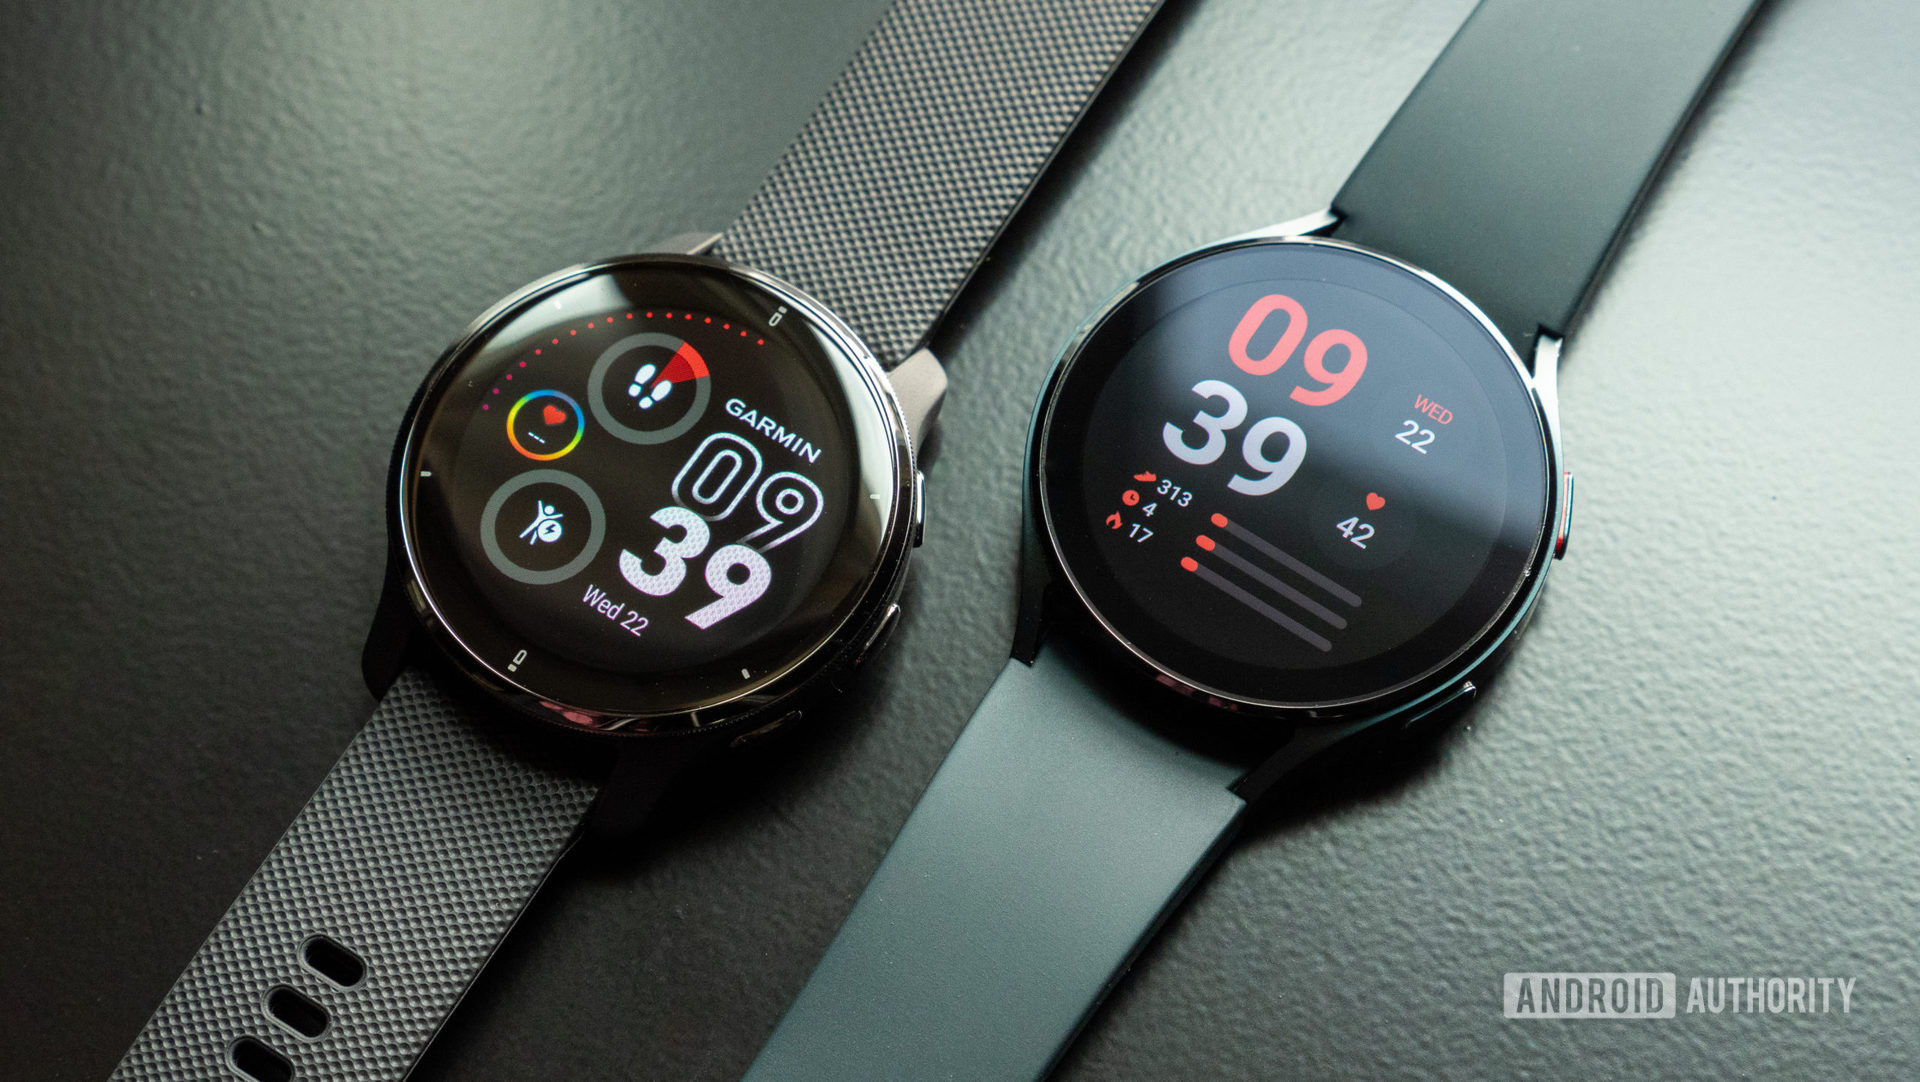 One of Wear OS device's biggest competitors, the Garmin Venu 2 Plus rests alongside a Samsung Galaxy Watch 4.